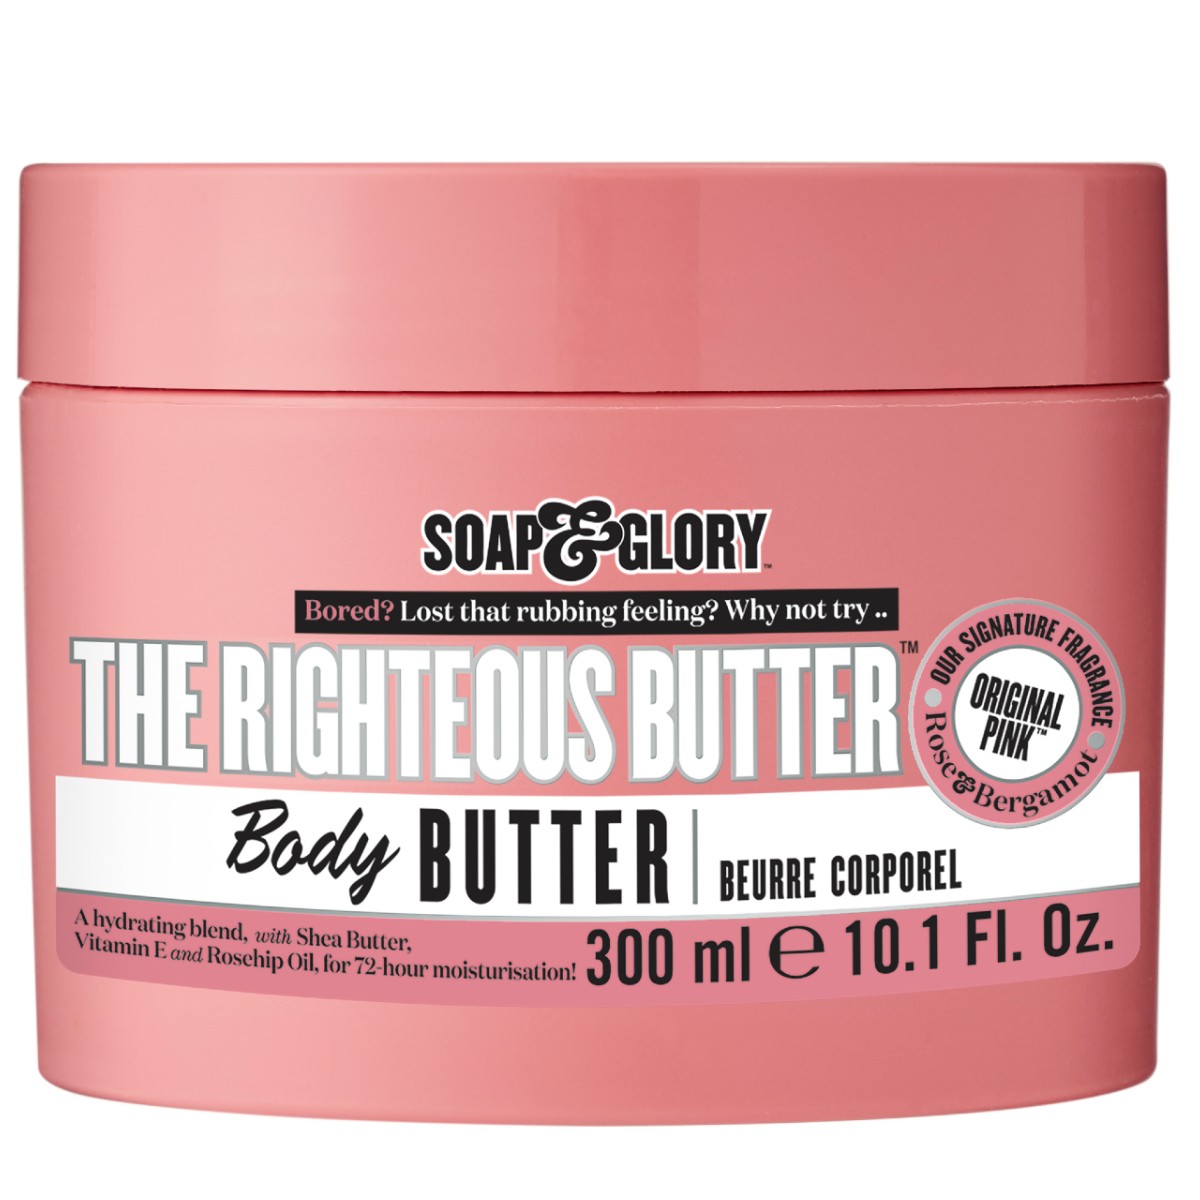 Soap & Glory The Righteous Butter Moisturizing Body Butter